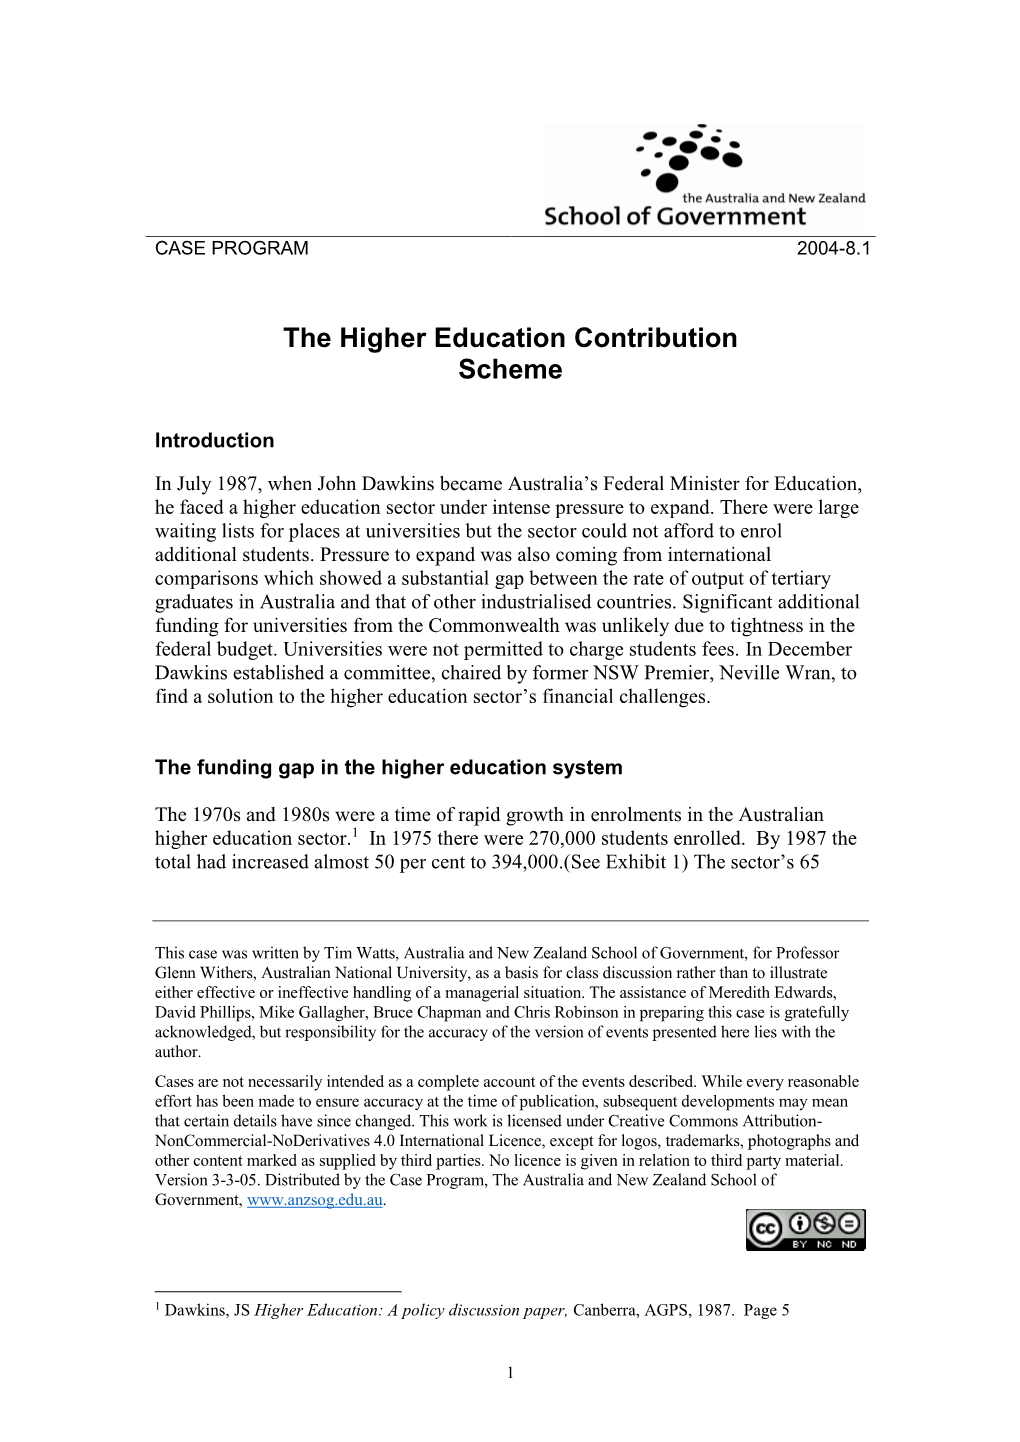 The Higher Education Contribution Scheme